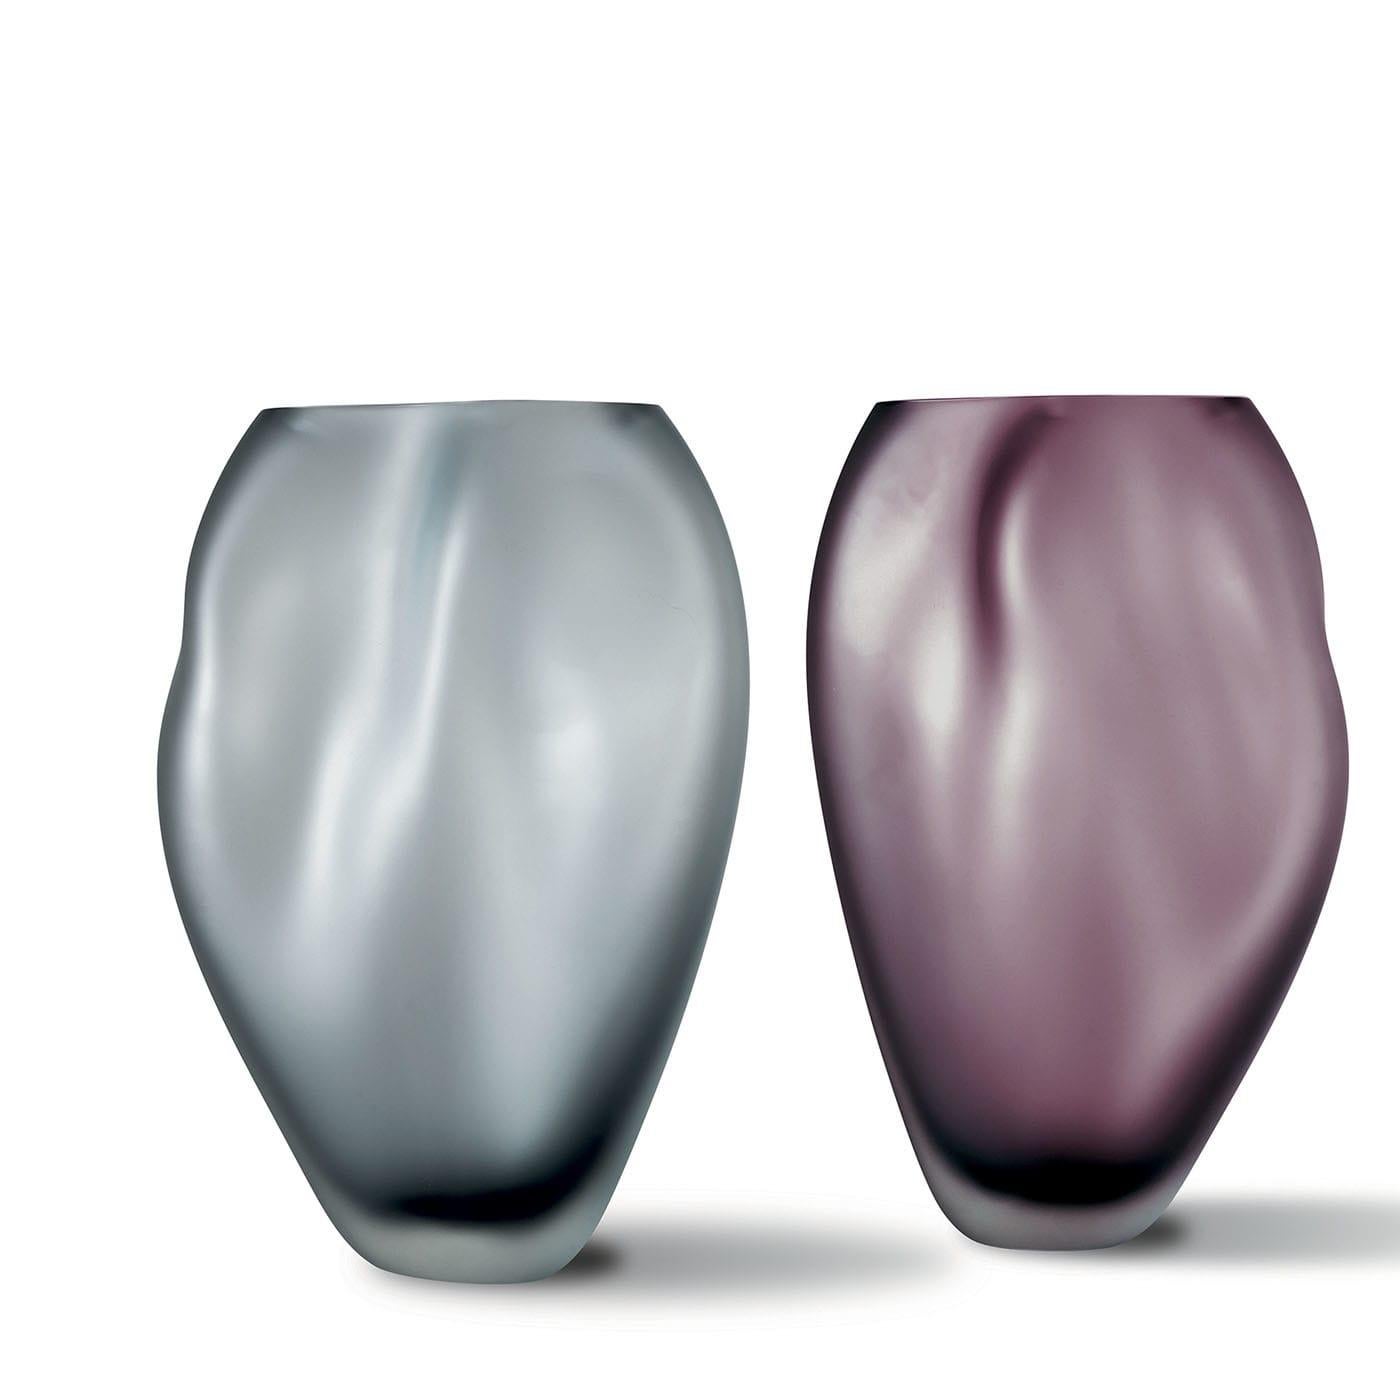 Inspired by water slightly rippled by the breeze, this amethyst-toned vase is a singular precious piece minutely mouth-blown by master craftsmen. Its distinctive, ethereal shape is obtained by heating the body up to almost losing control, an